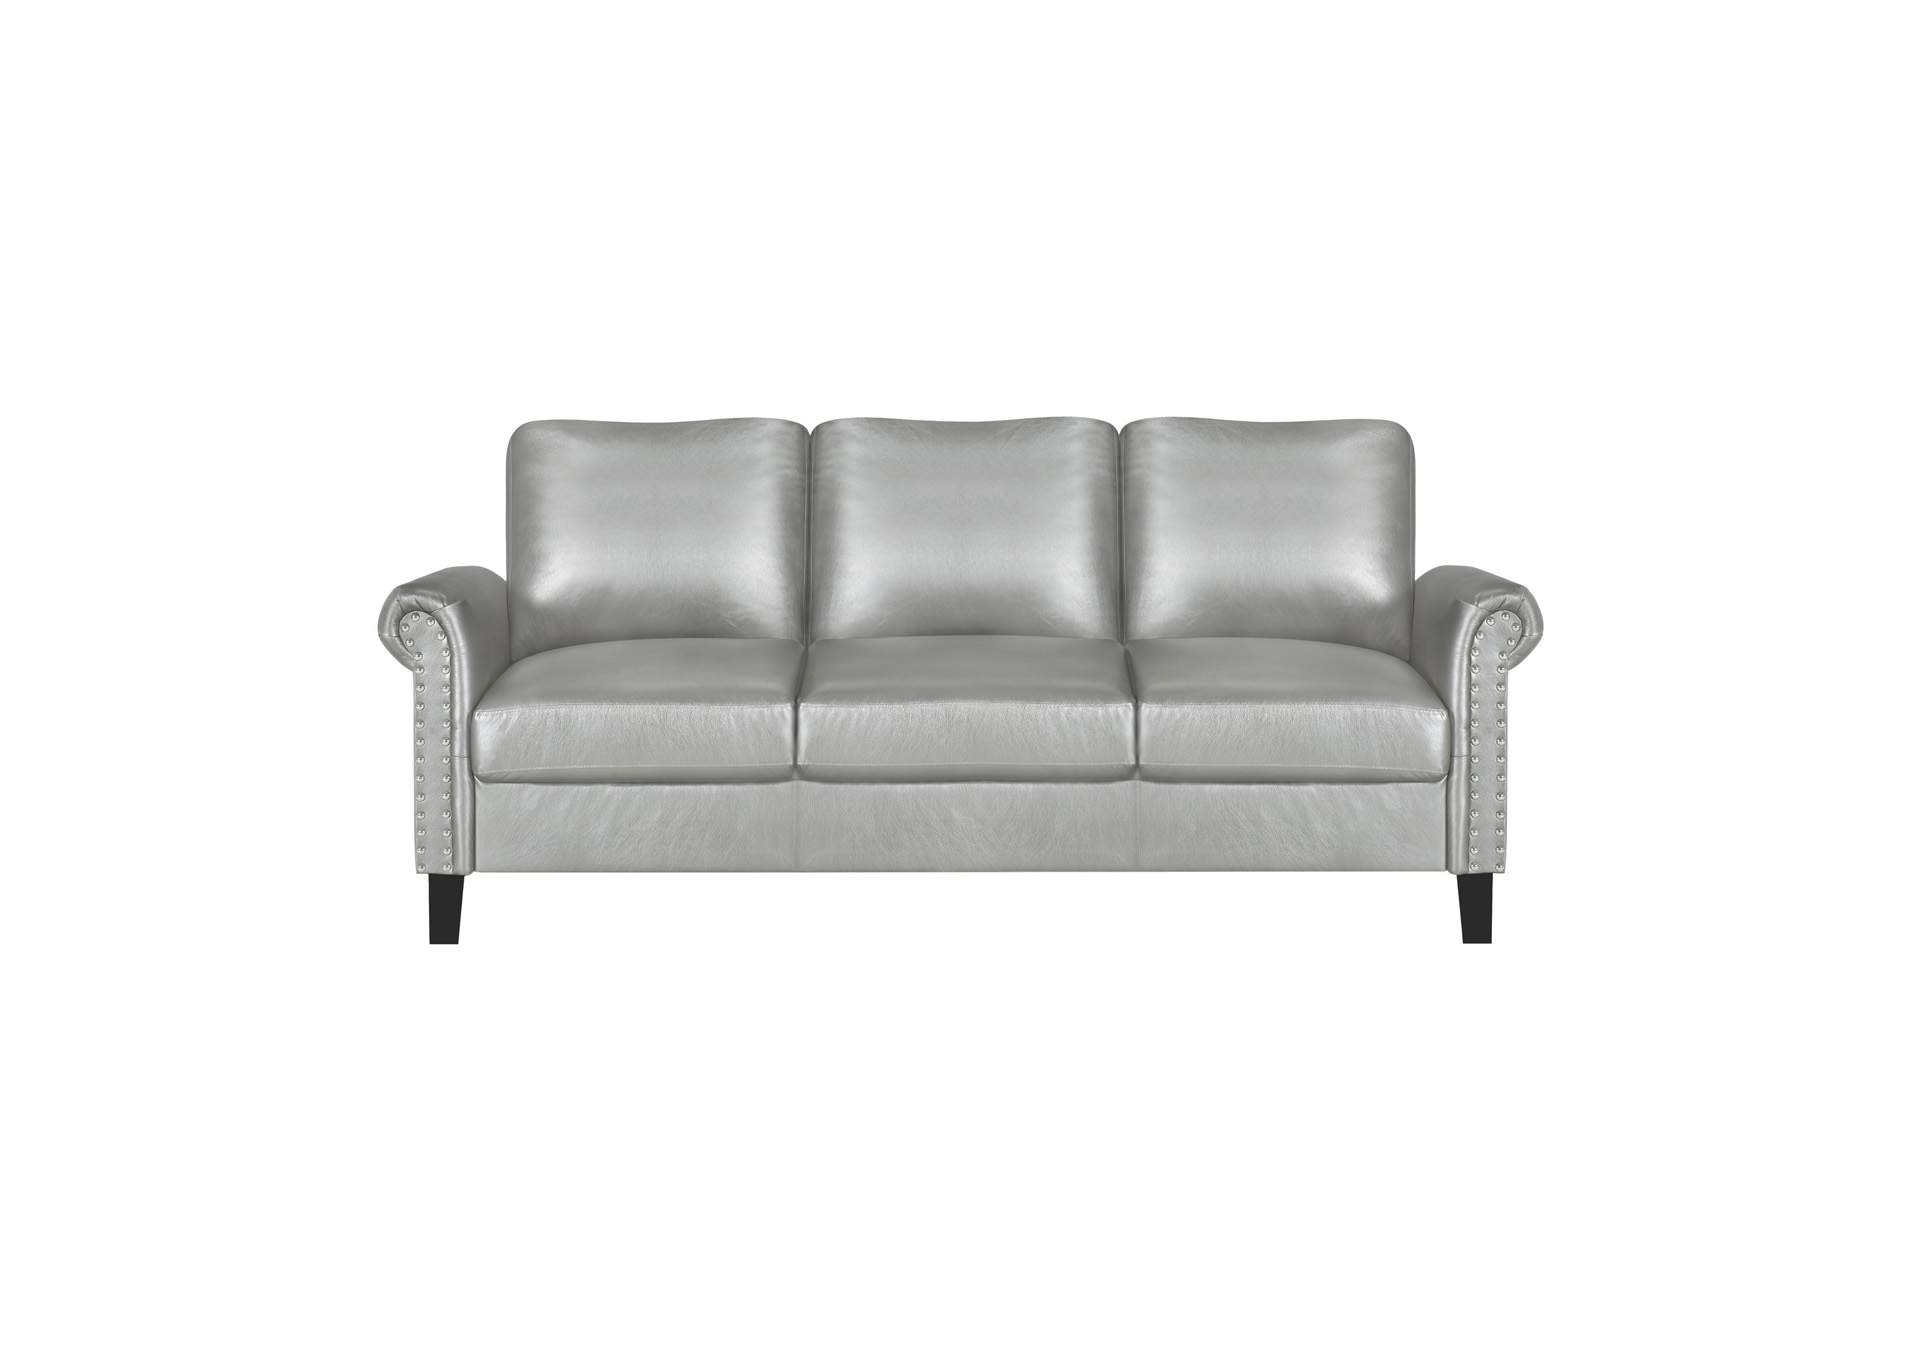 Silver Faux Leather Sofa Best, High Quality Faux Leather Sofa